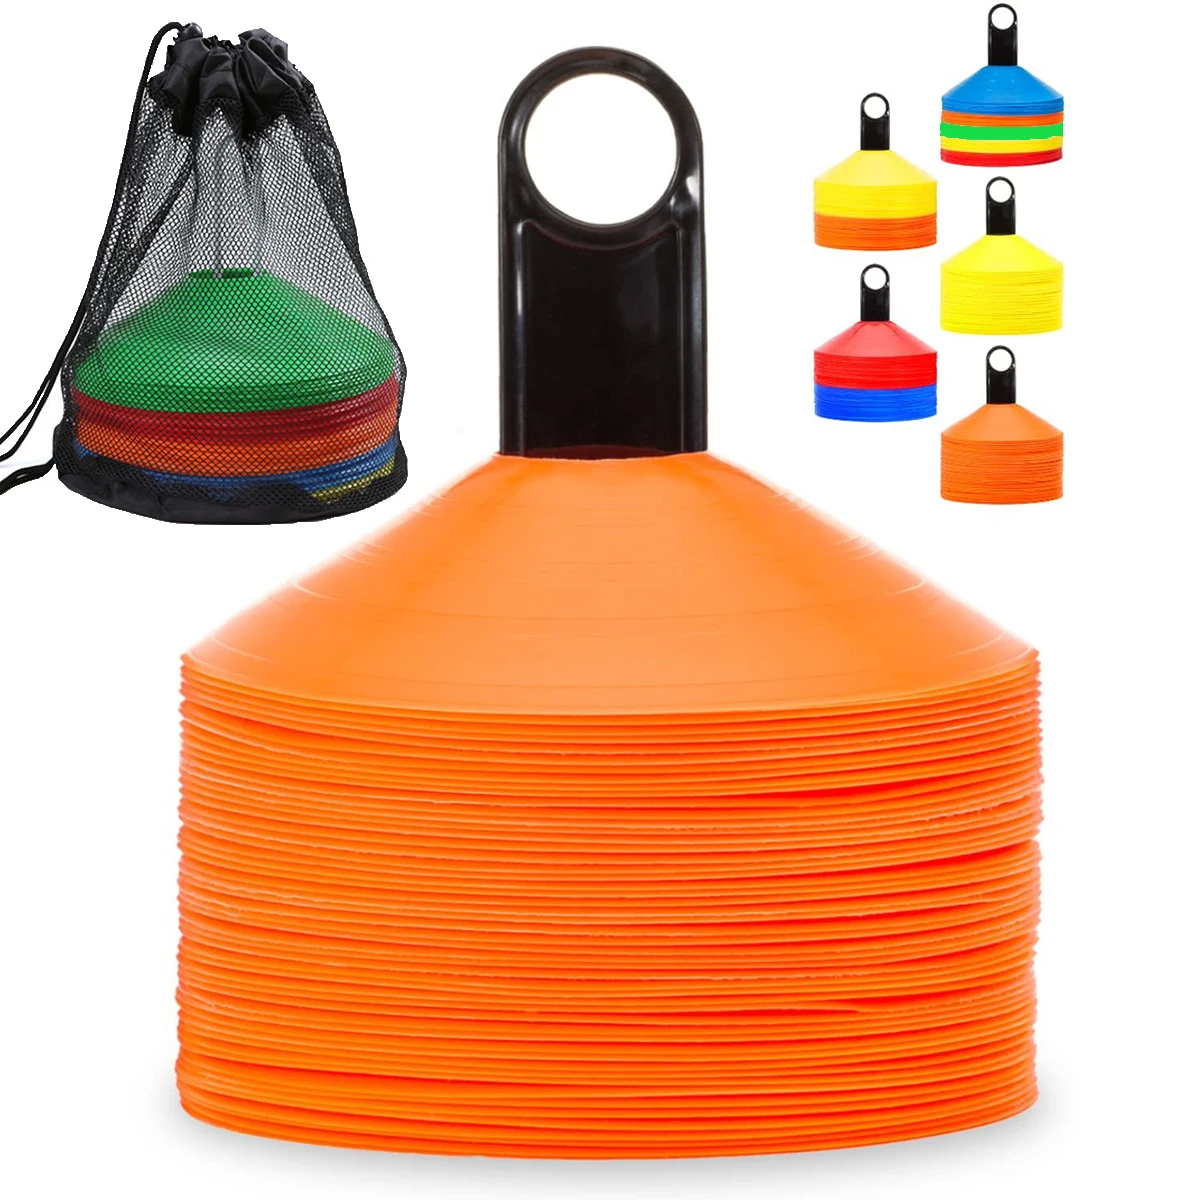 Agility Training Soccer Cones with Carry Bag and Holder for Football Basketball Sports Field Cone Markers Set of 50 ANSLYQA Disc Cones 